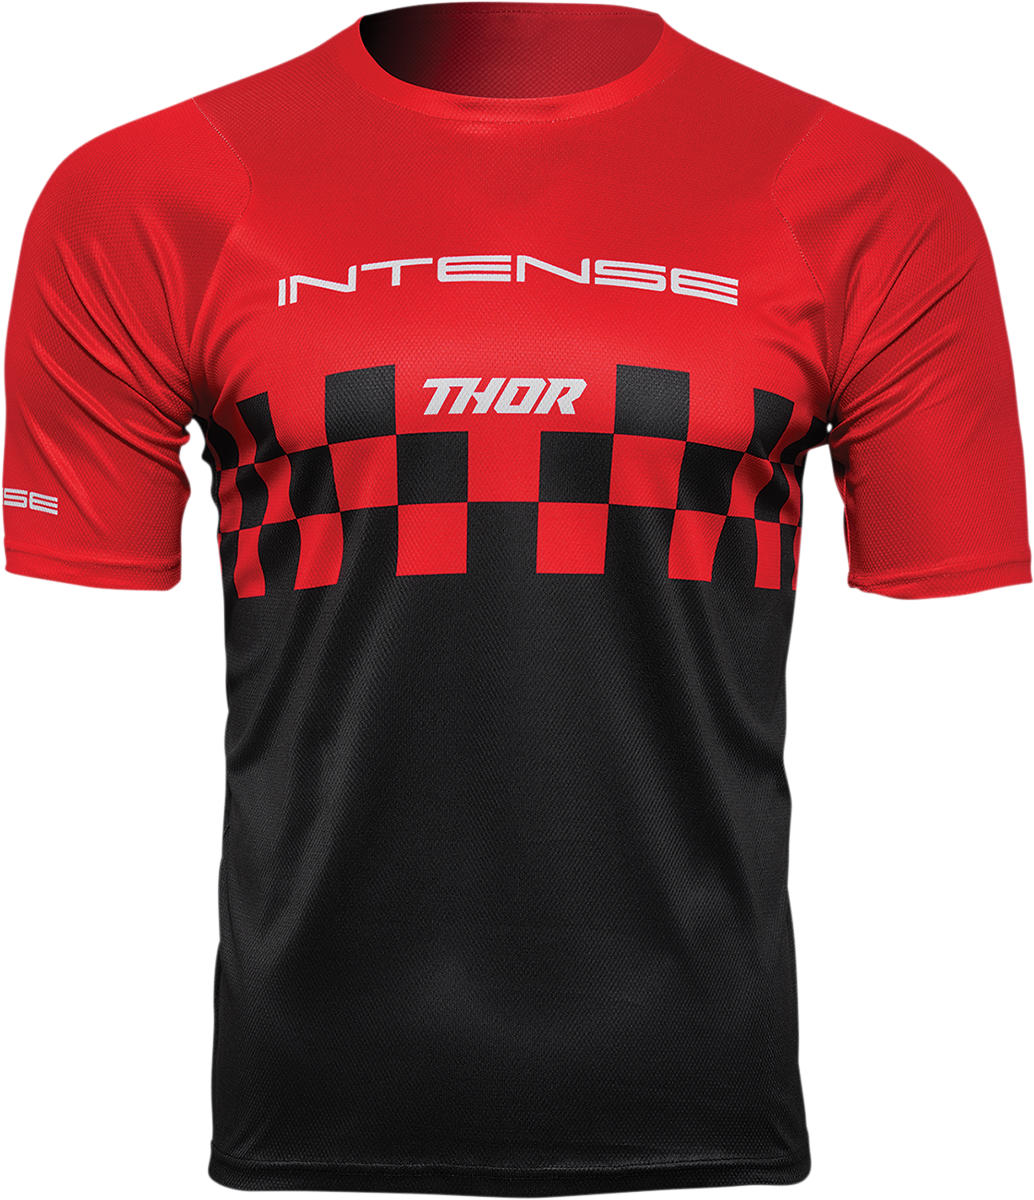 THOR Intense Chex Jersey - Red/Black - Small 5120-0139